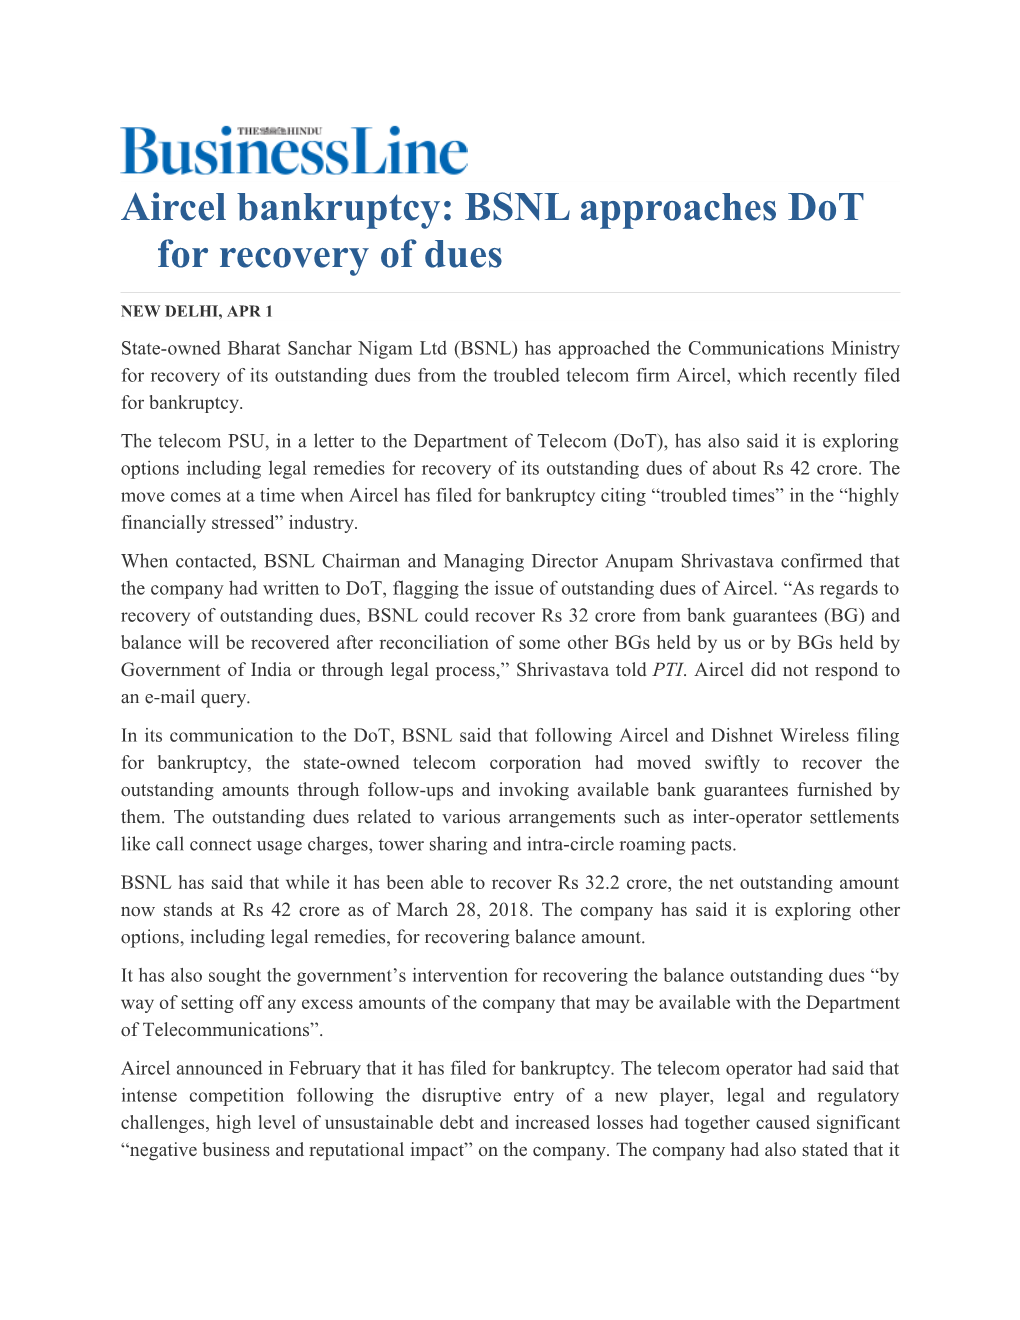 Aircel Bankruptcy: BSNL Approaches Dot for Recovery of Dues